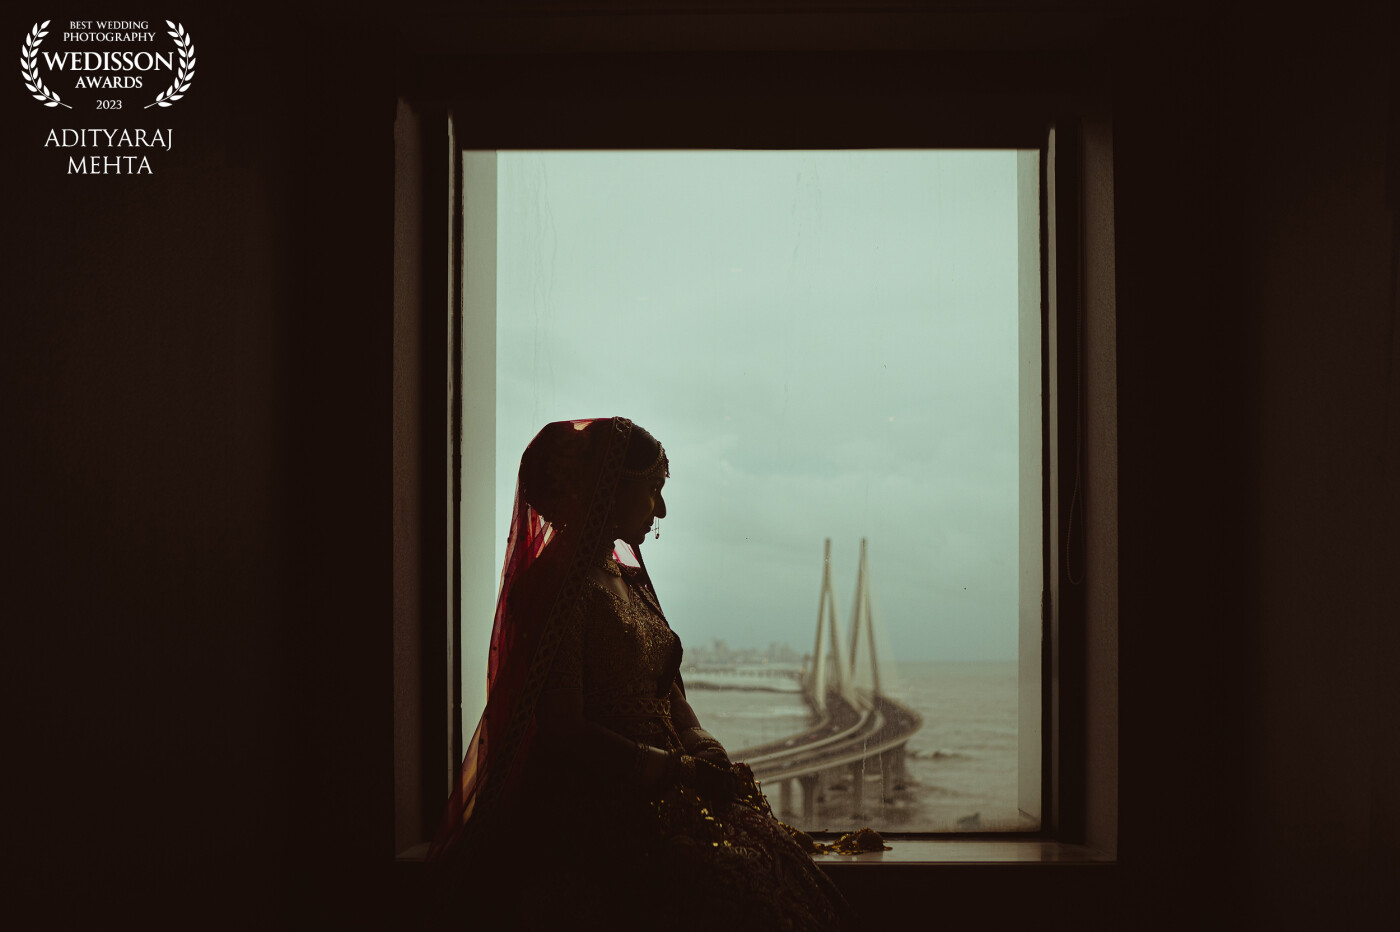 Ritika was one of the most poised brides we've ever photographed yet.<br />
<br />
We thought this image is a great metaphor for her personality, much like the ocean is in constant motion and chaos, the bridge across it just brings a sense of calm and stillness to it.